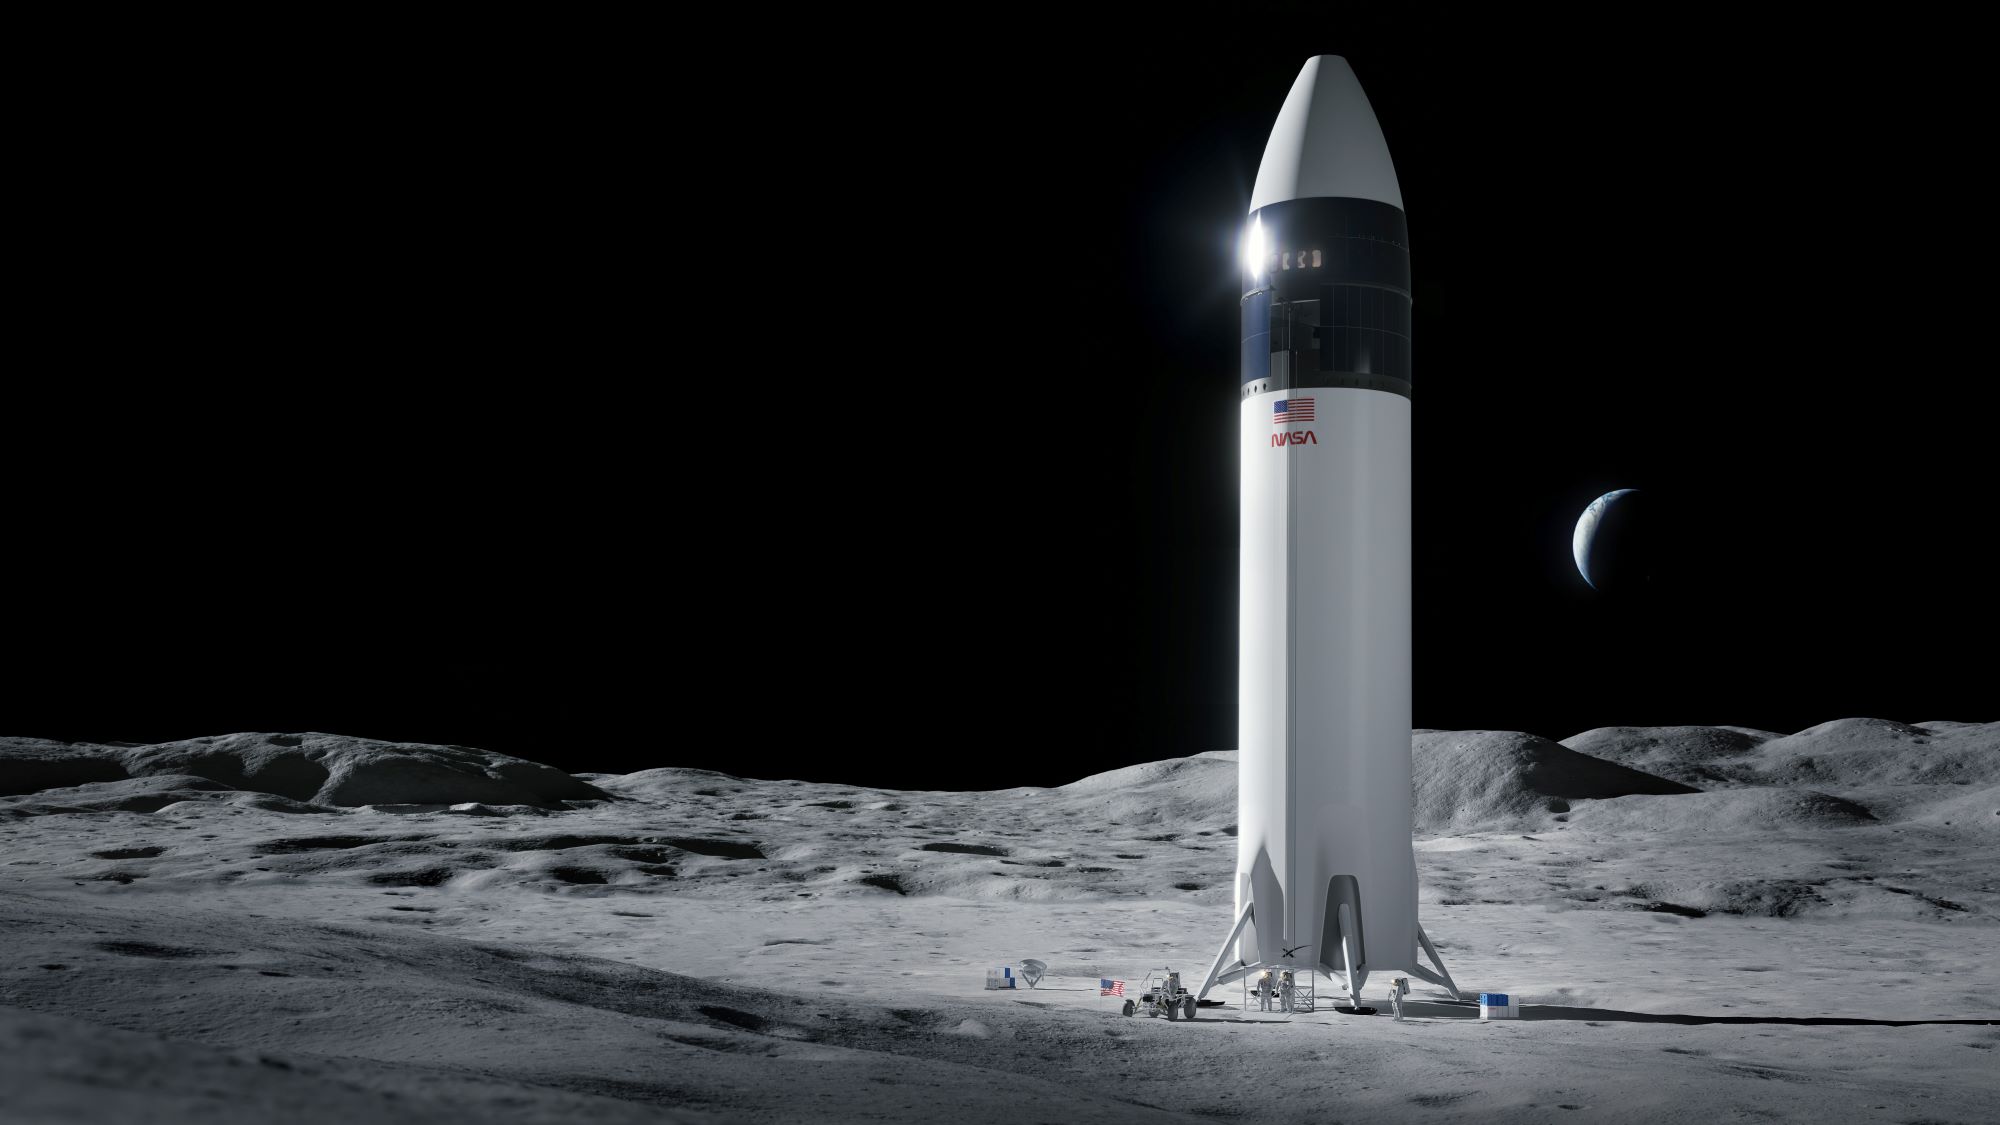 What SpaceX—and anyone else going to the moon—can learn from the prep for Starship’s next launch